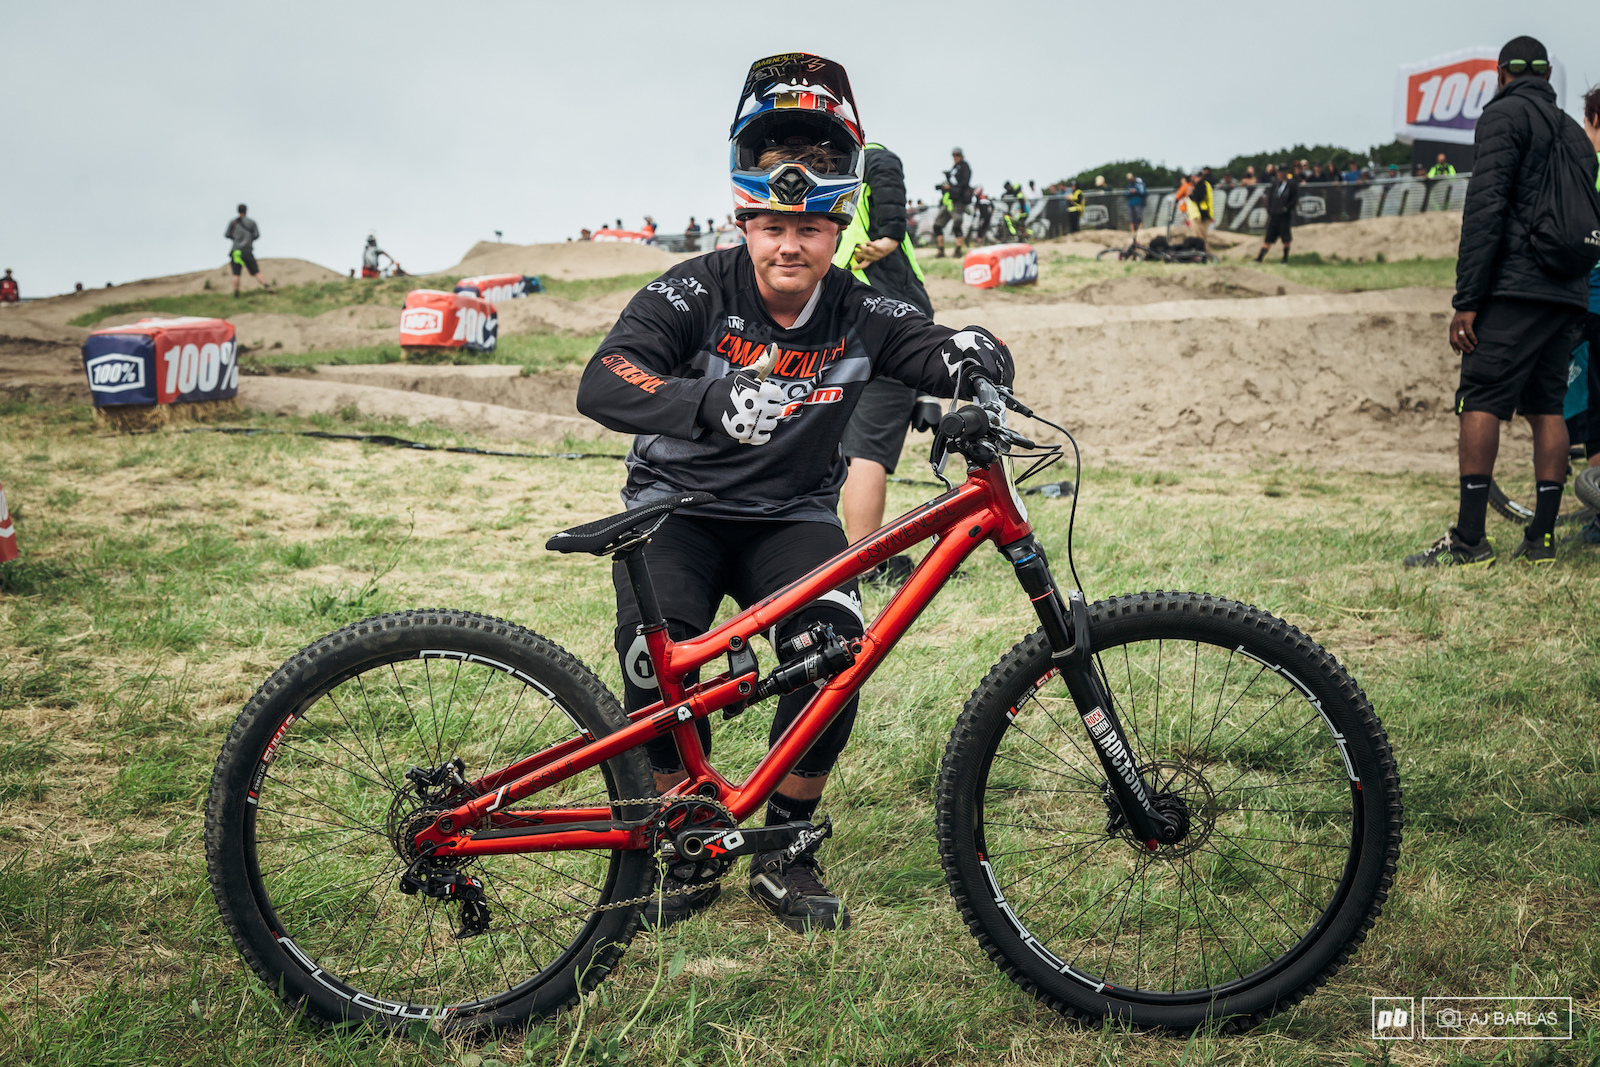 Kyle Strait and his signature Commencal Absolut SX. Despite being "26 for life", Lyle was running a 275 Pike set to 100mm with a 27.5 front wheel, so that he could run a new tire that isn't available in 26", yet. 

Kyle also runs a 780mm bar for slalom, compared to his usual 755mm bar that he has on this bike. He ran his Rockshox suspension a little softer than it is usually setup as well.